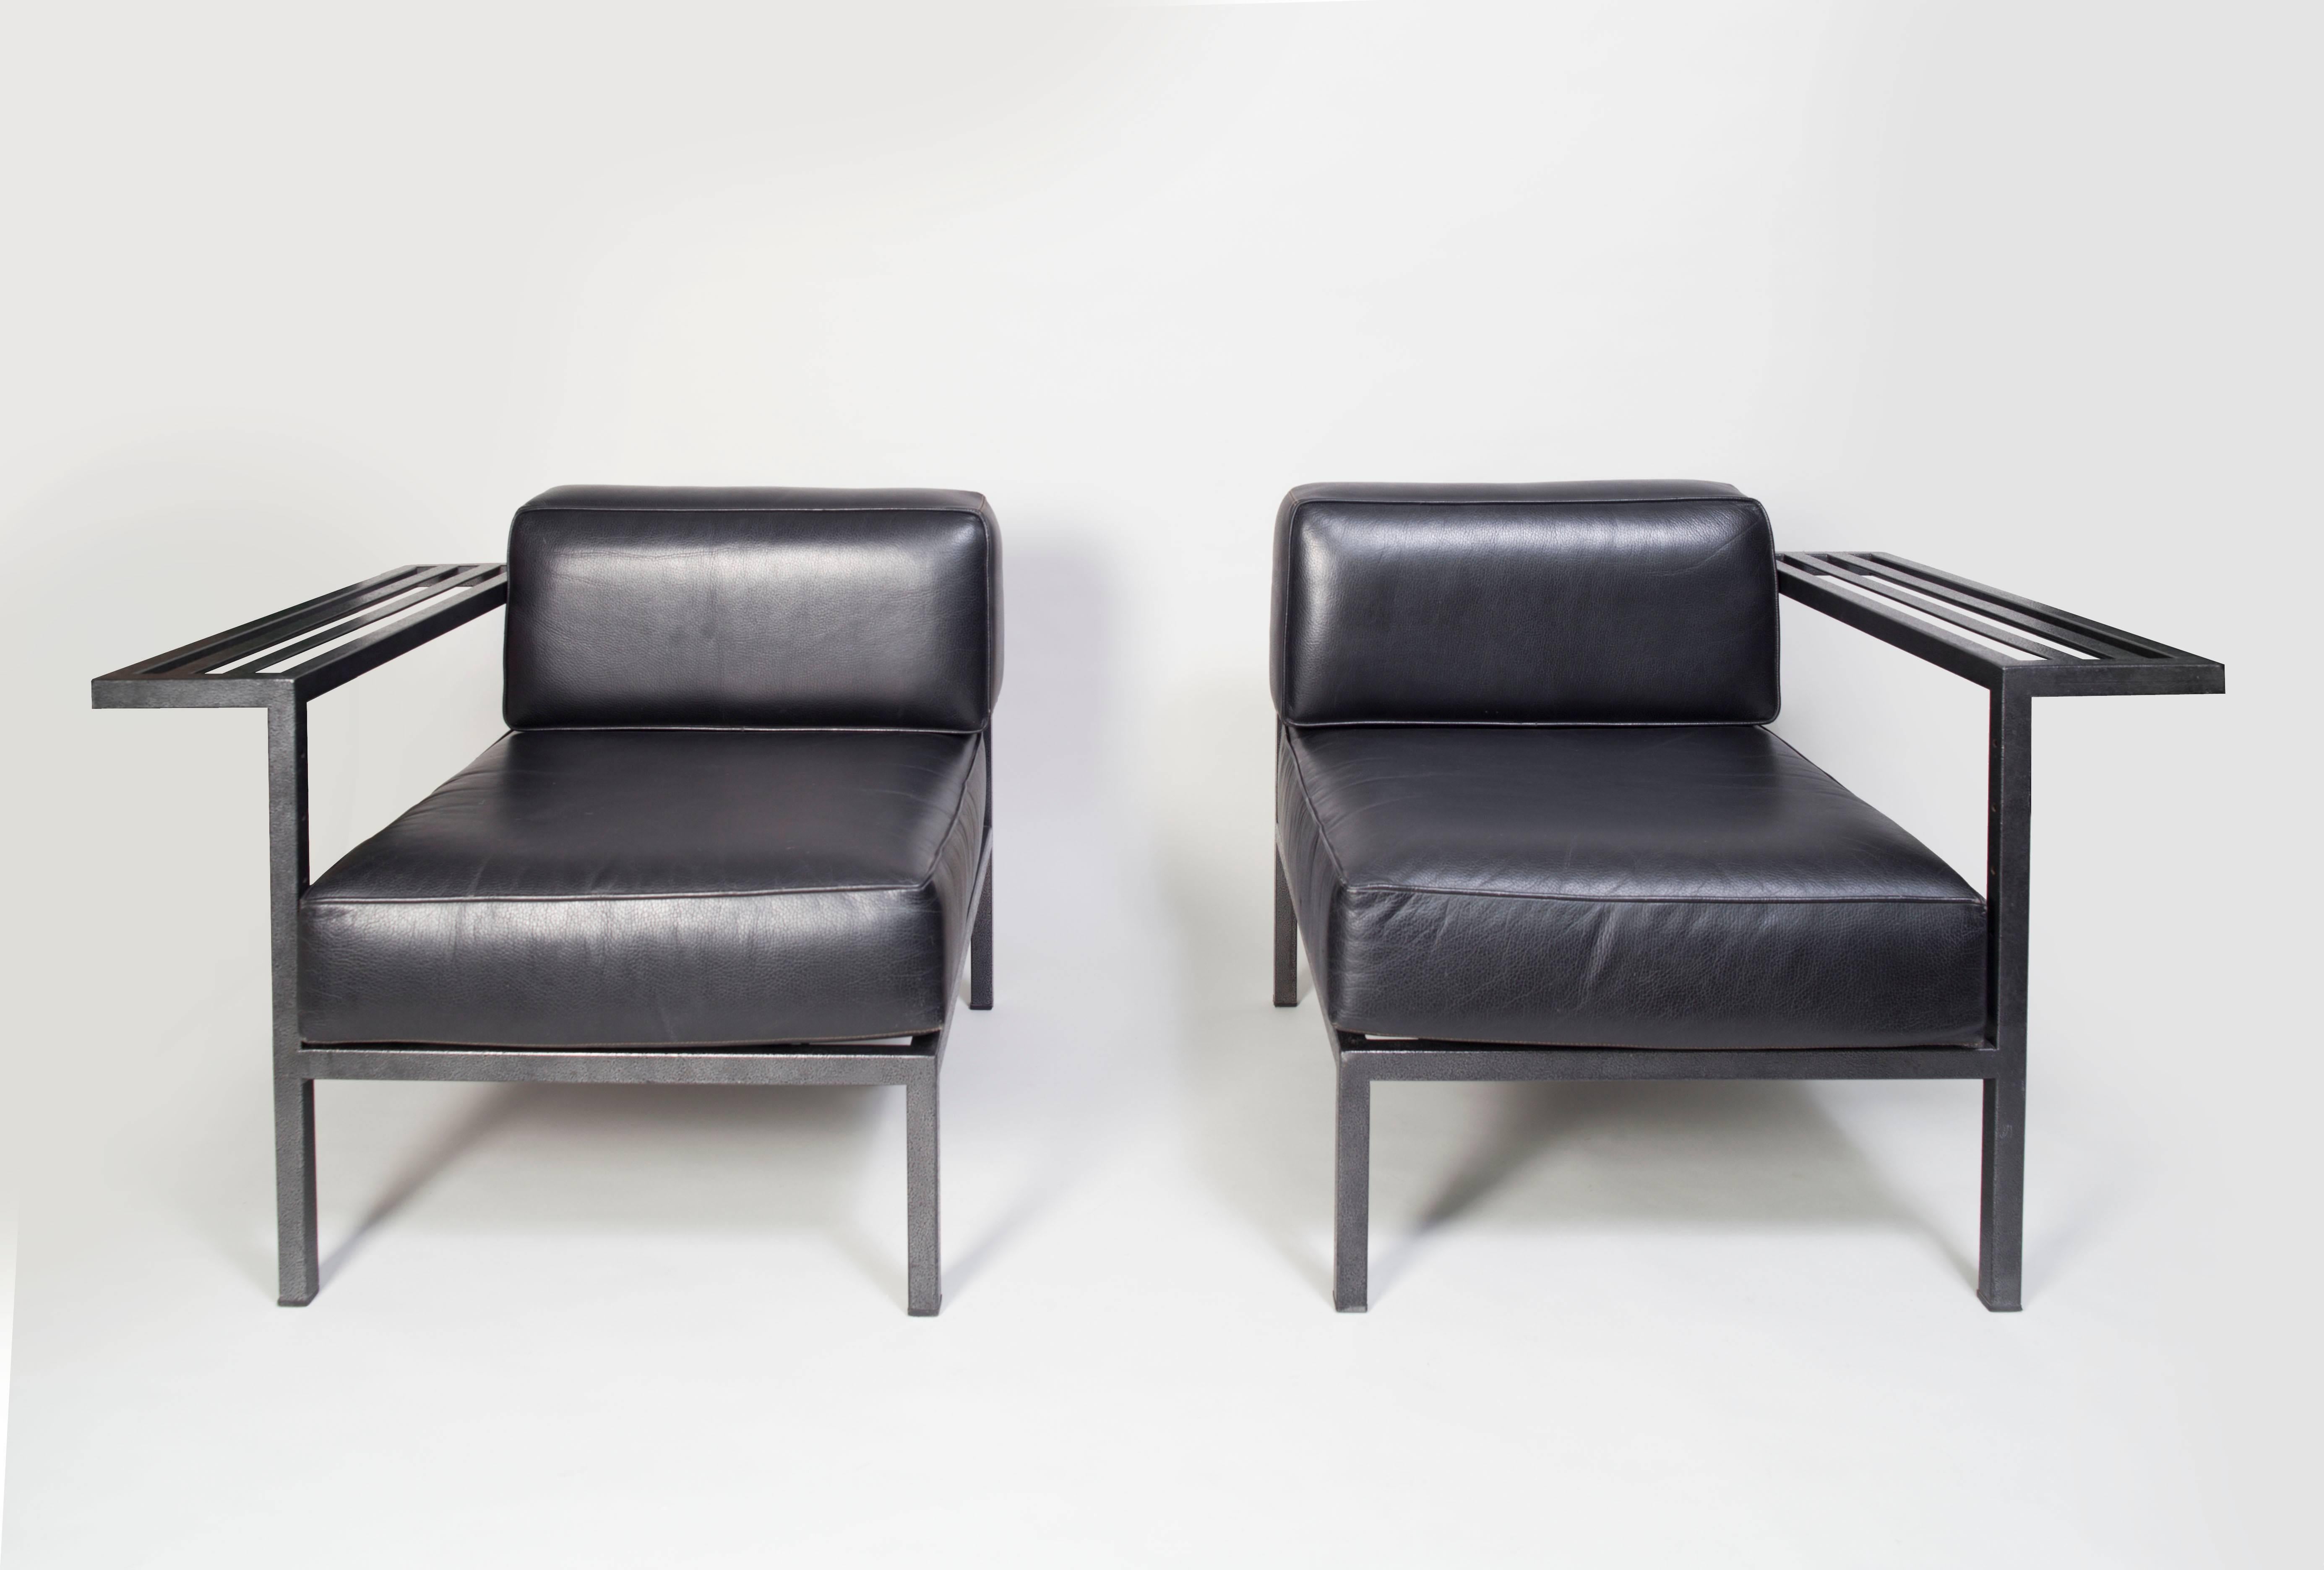 20th century pair of French black leather armchairs-sofa from the 1980s.
The structure has a lightly hammered surface. 
The two asymmetric armchairs, if joined together, create a loveseat.